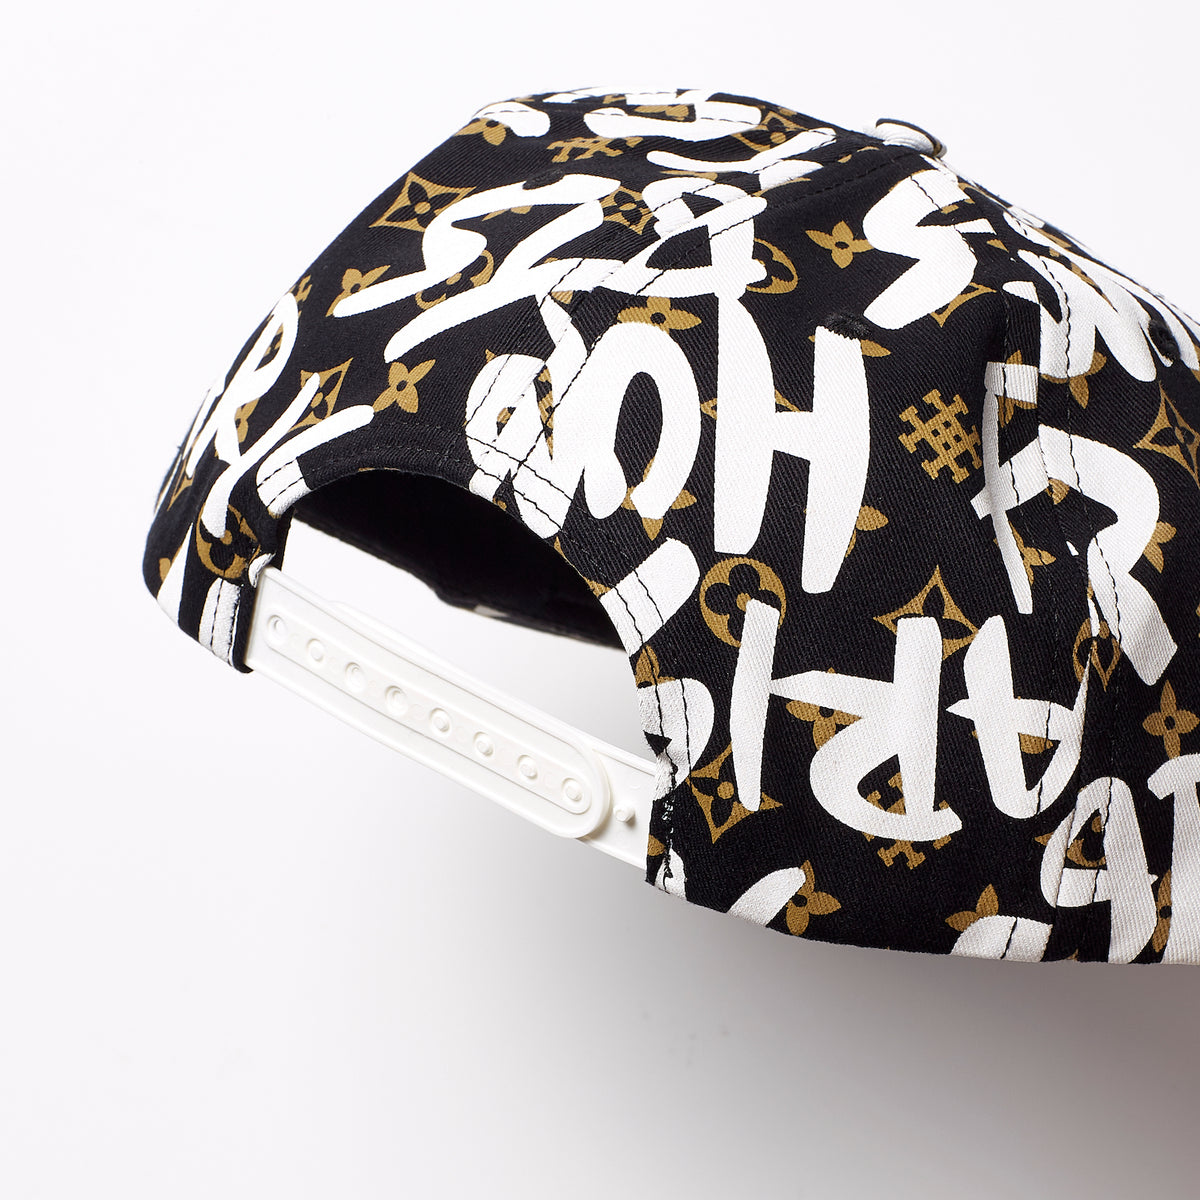 For The Homies Graffiti Hat